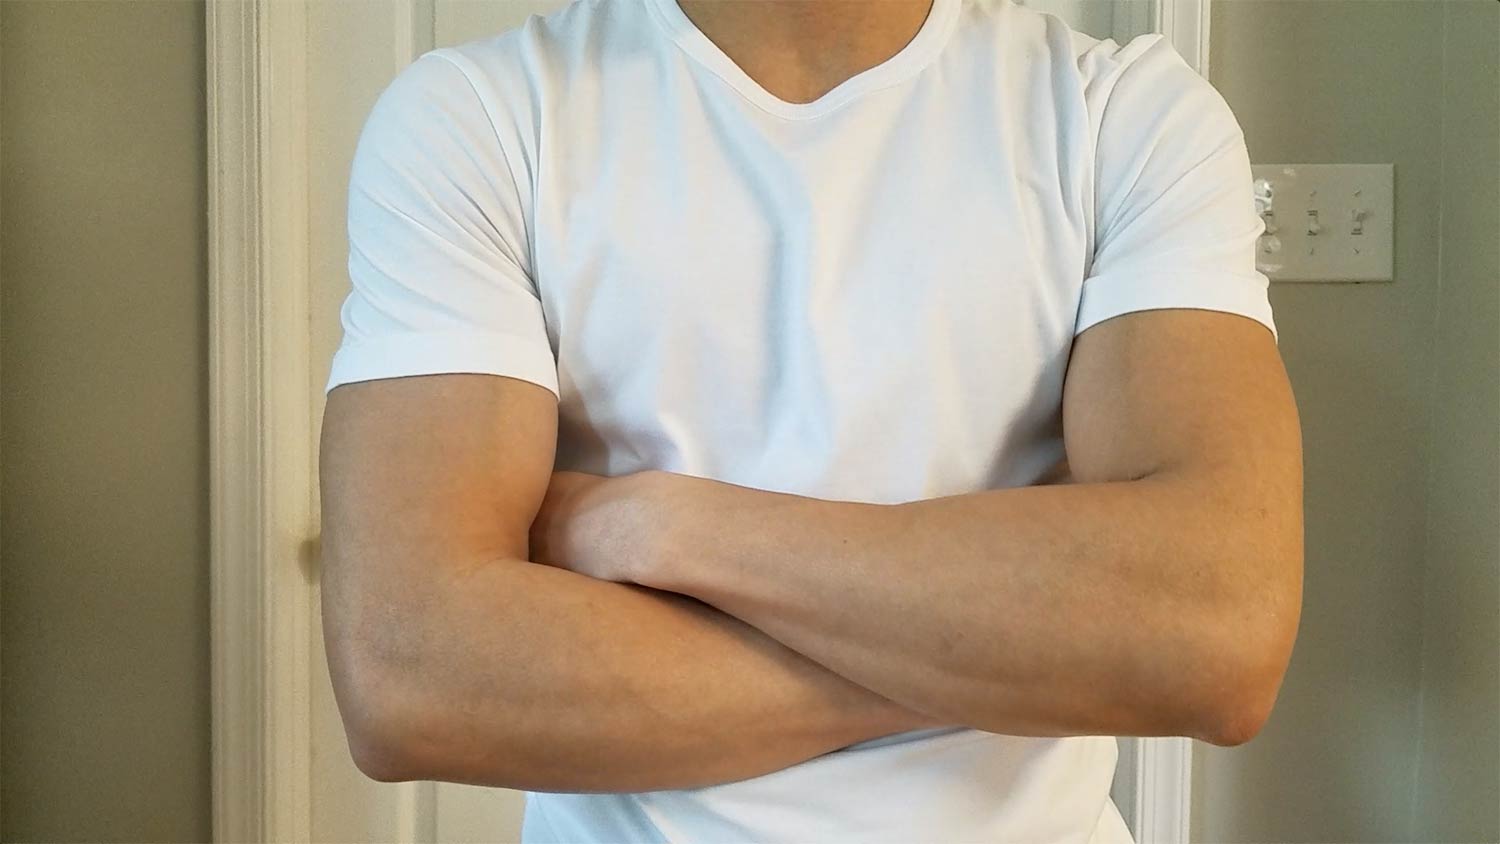 Asket White Tee Arms Folded